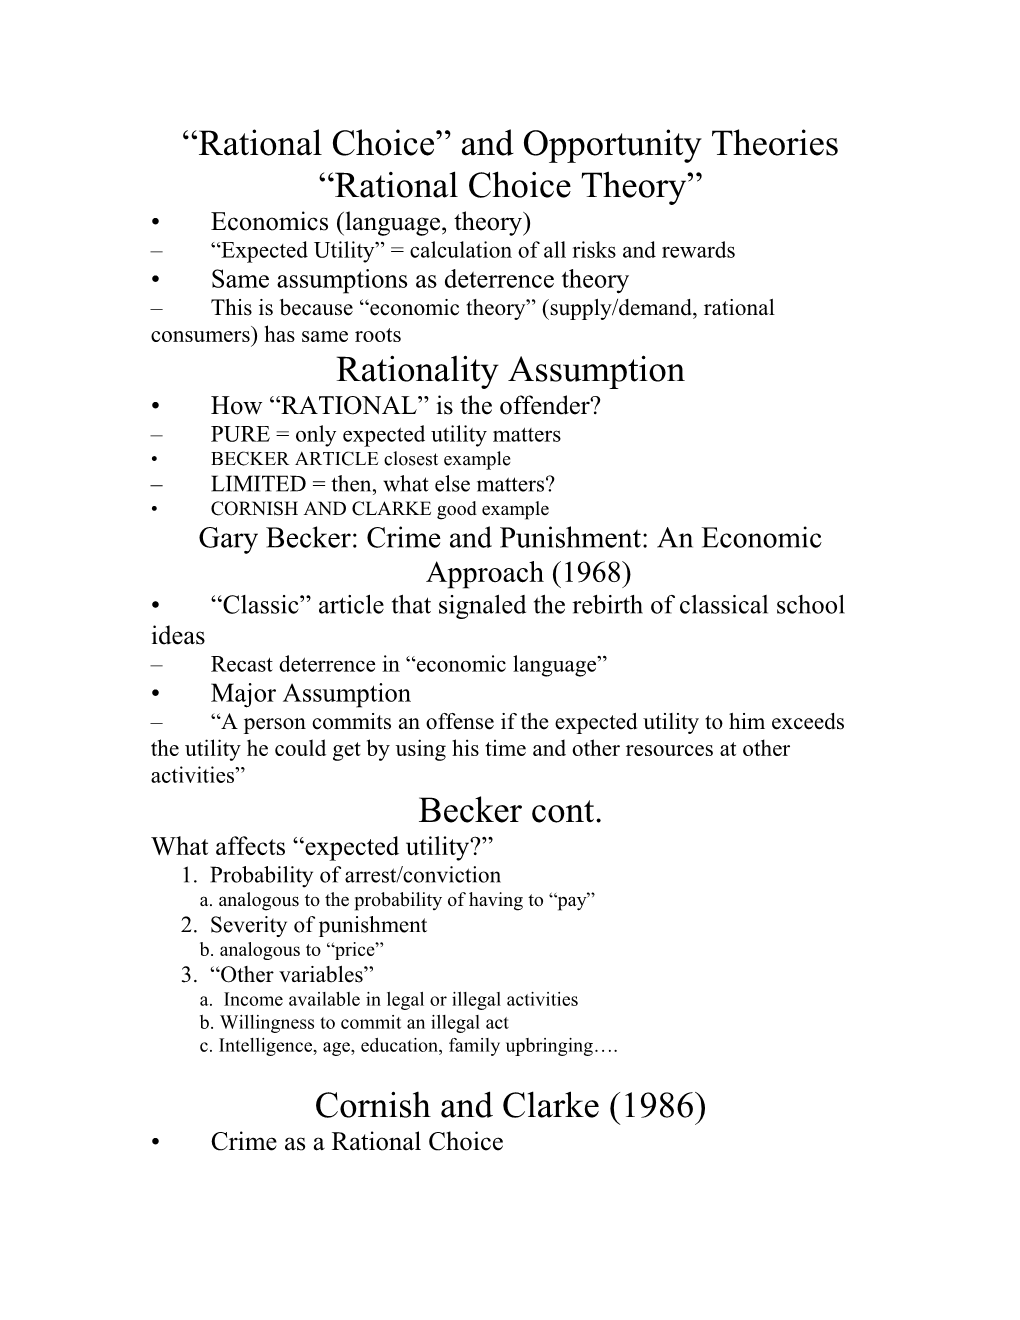 Rational Choice and Opportunity Theories